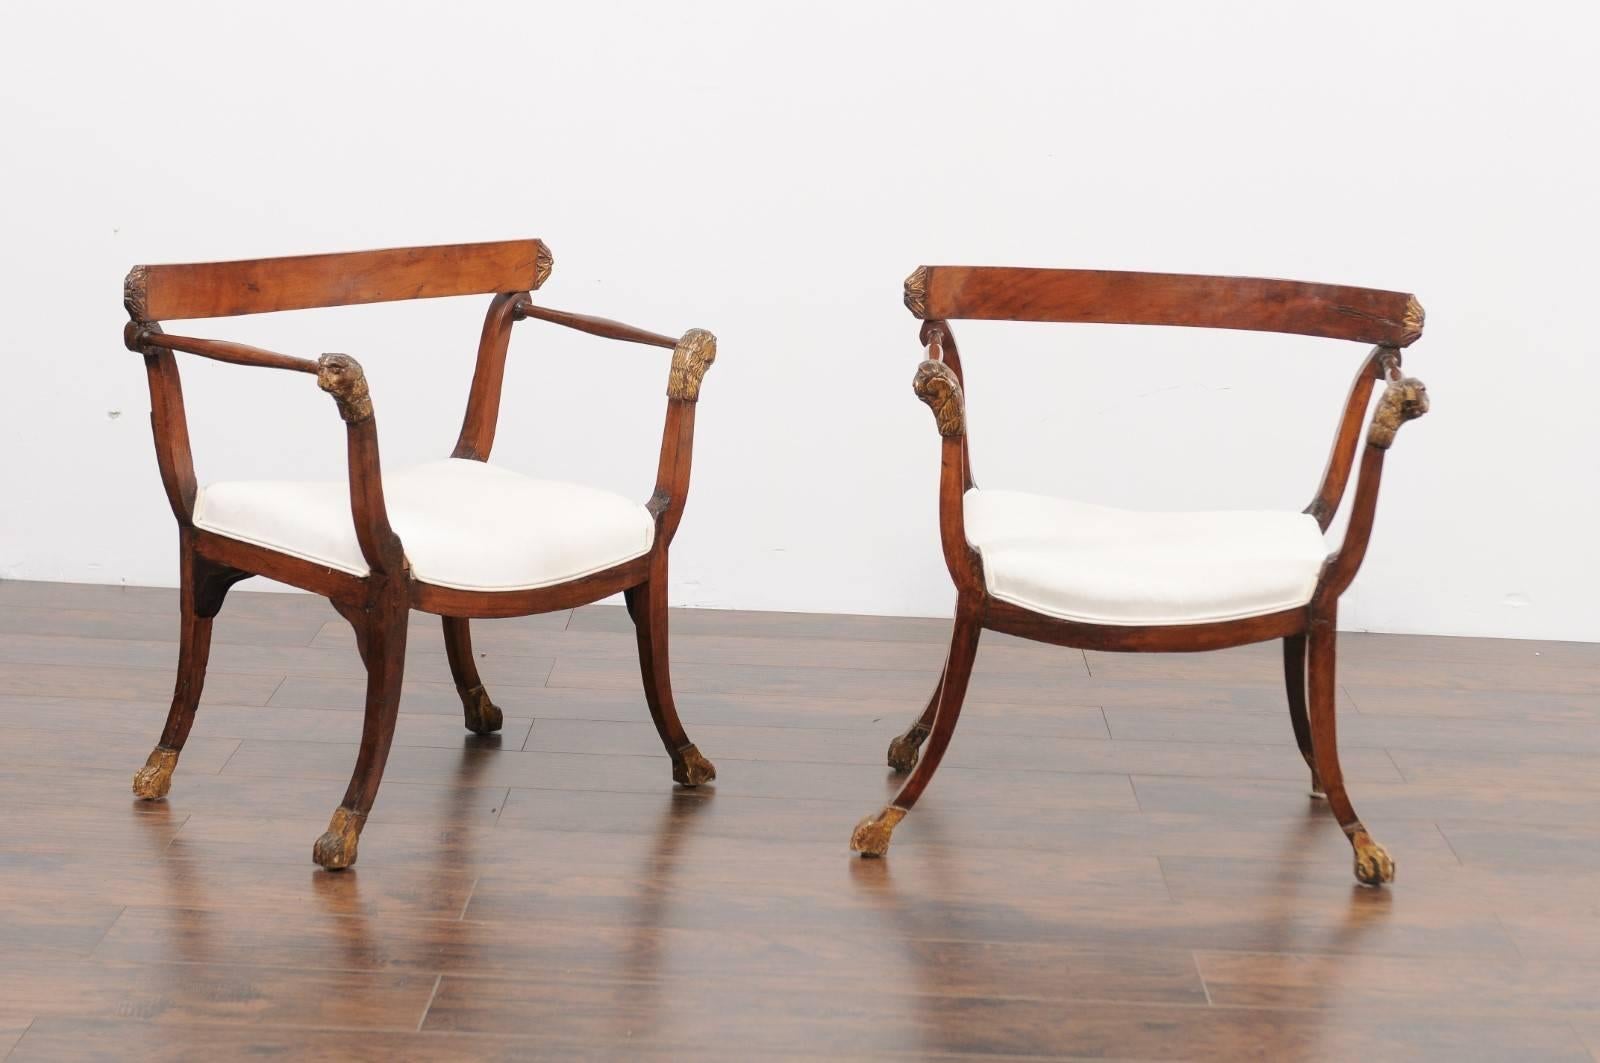 A pair of Italian walnut armchairs from the late 18th century. This pair of exquisite Italian chairs from circa 1790 features a simple and elegant curved top rail in the back, sitting over two discreet volutes. The upholstered seat supports two